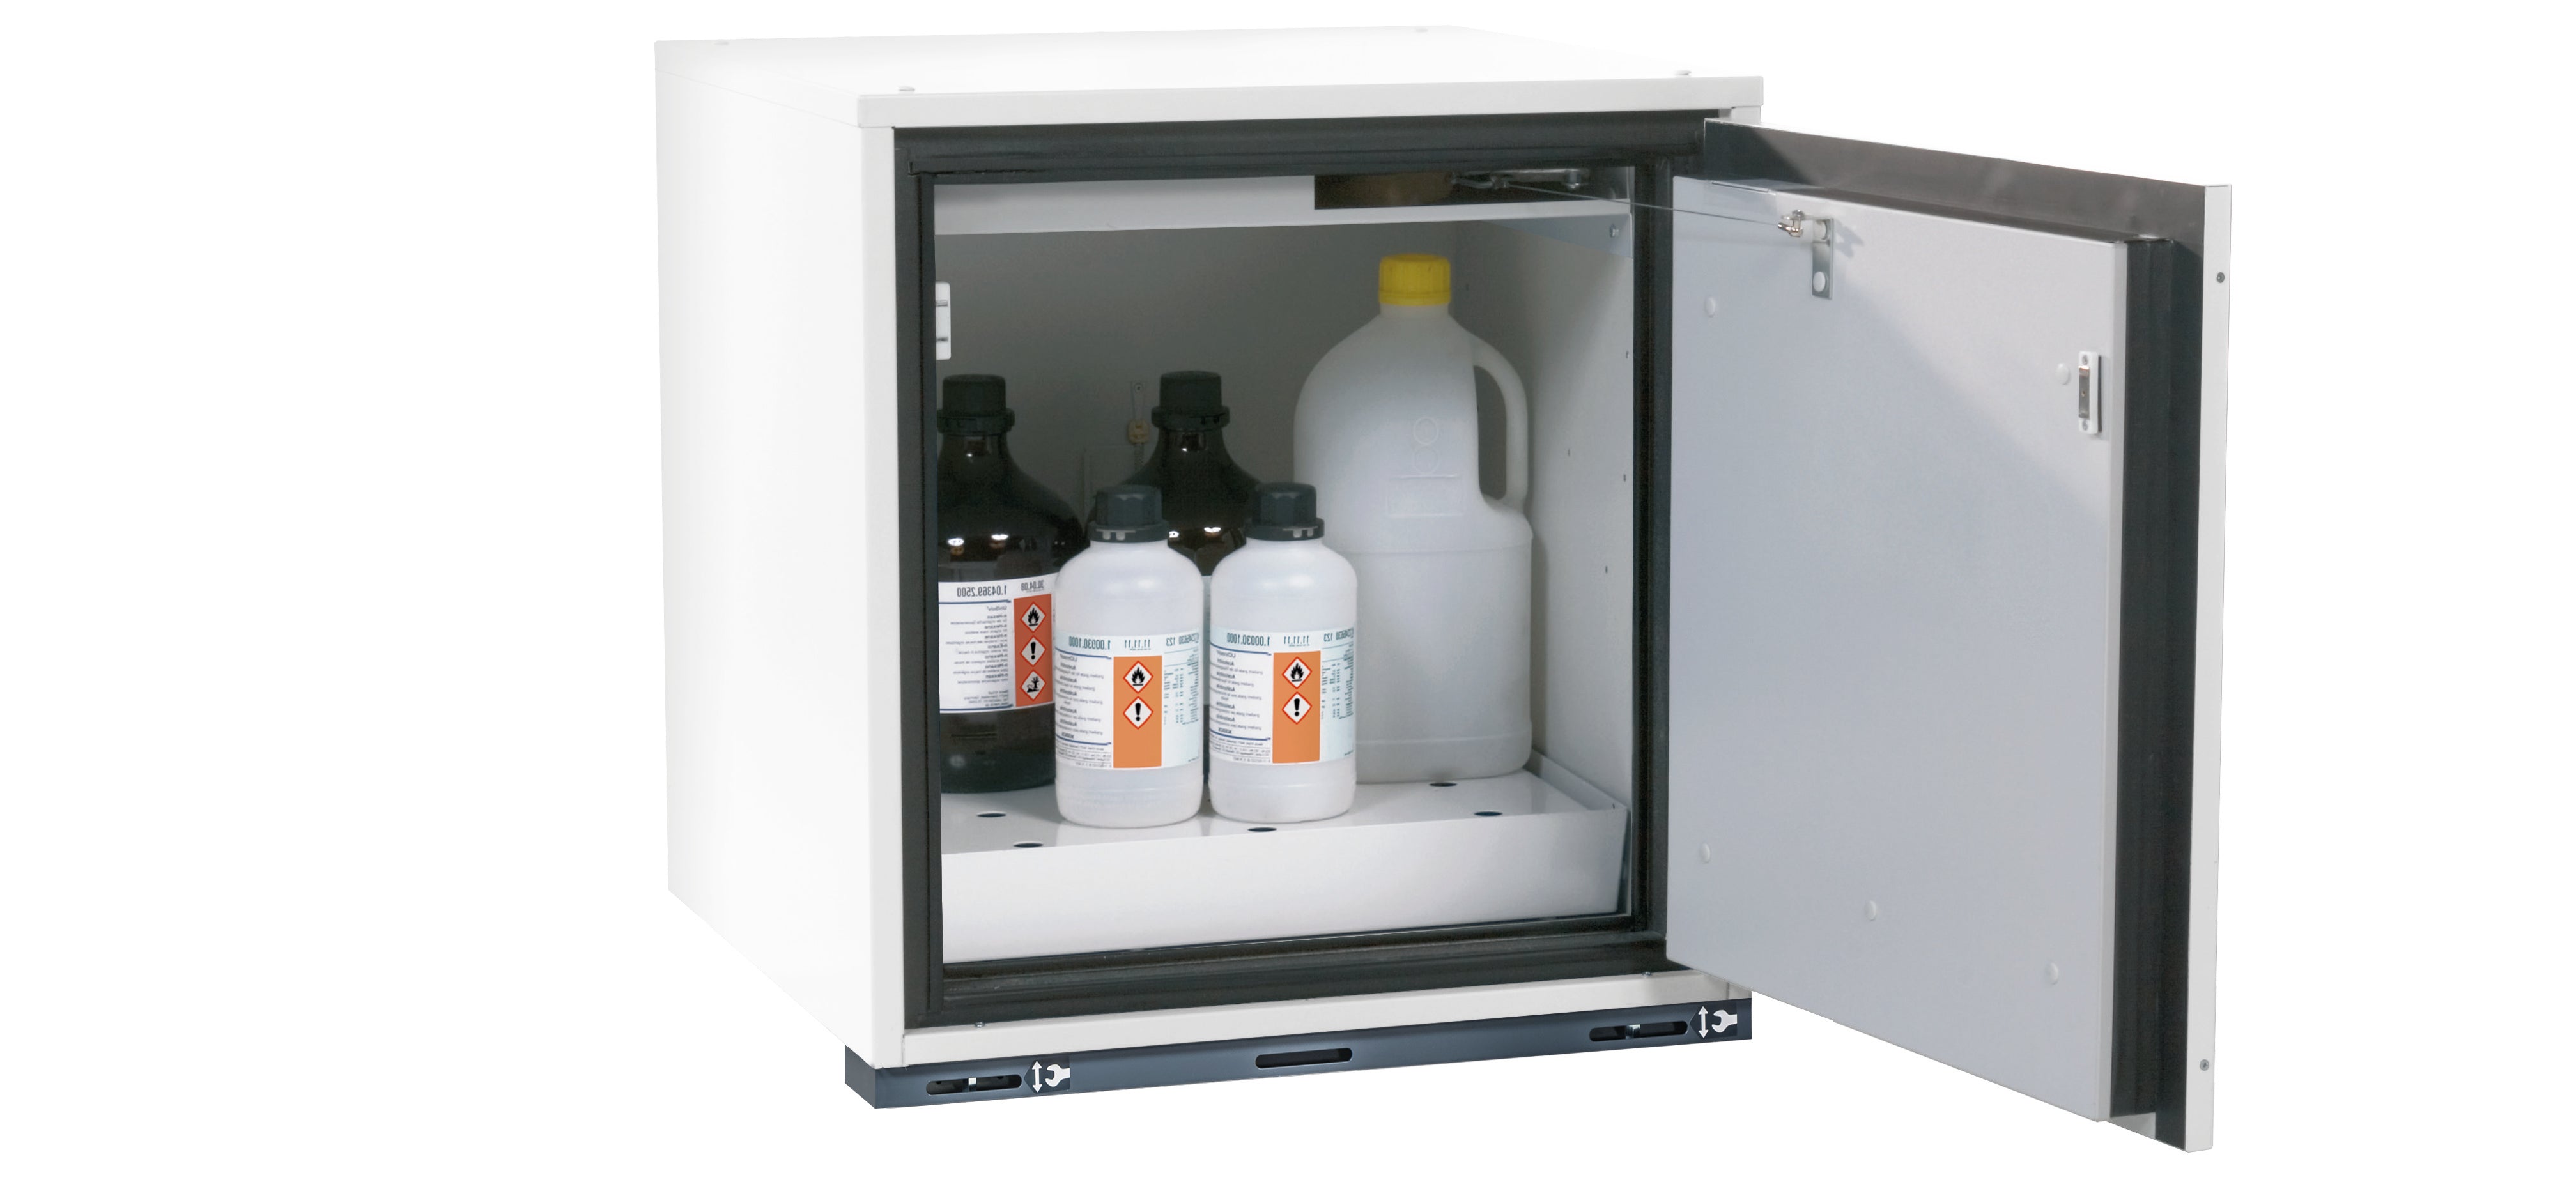 Type 90 safety base cabinet UB-T-90 model UB90.060.059.050.UL.TR in laboratory white (similar to RAL 9016) with 1x perforated plate insert standard (sheet steel)